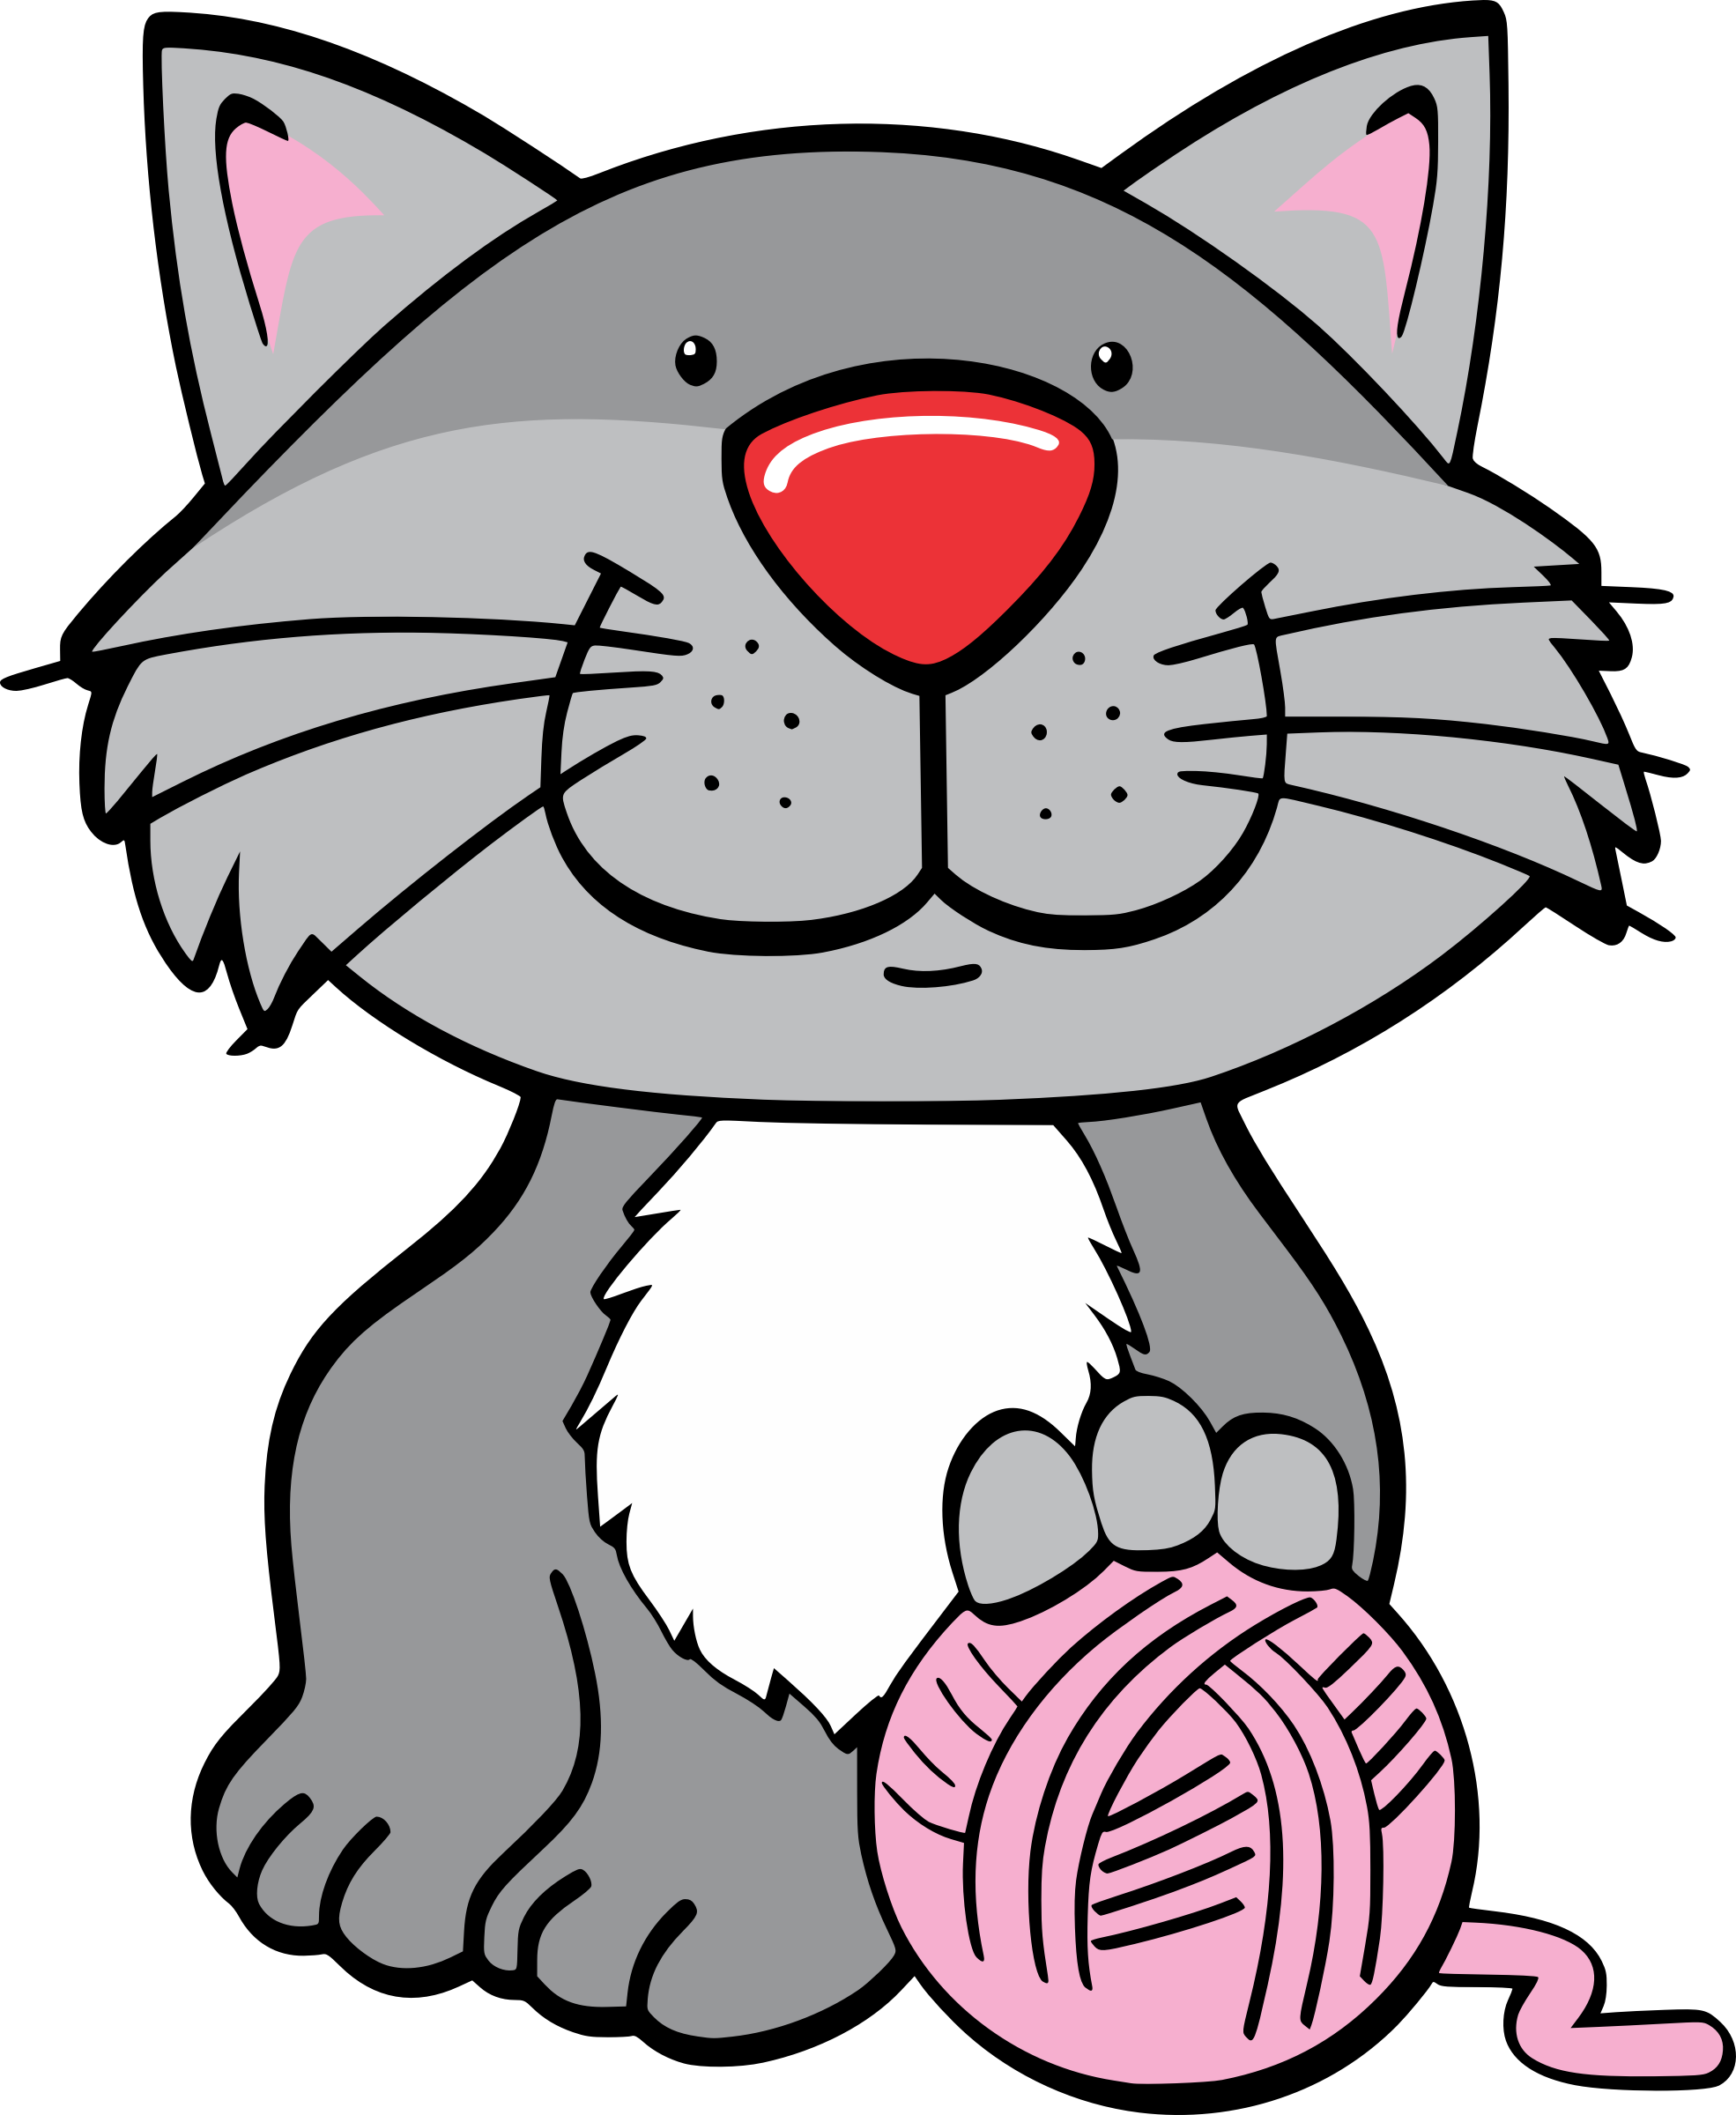 Knitting clipart yarn. Cat with big image